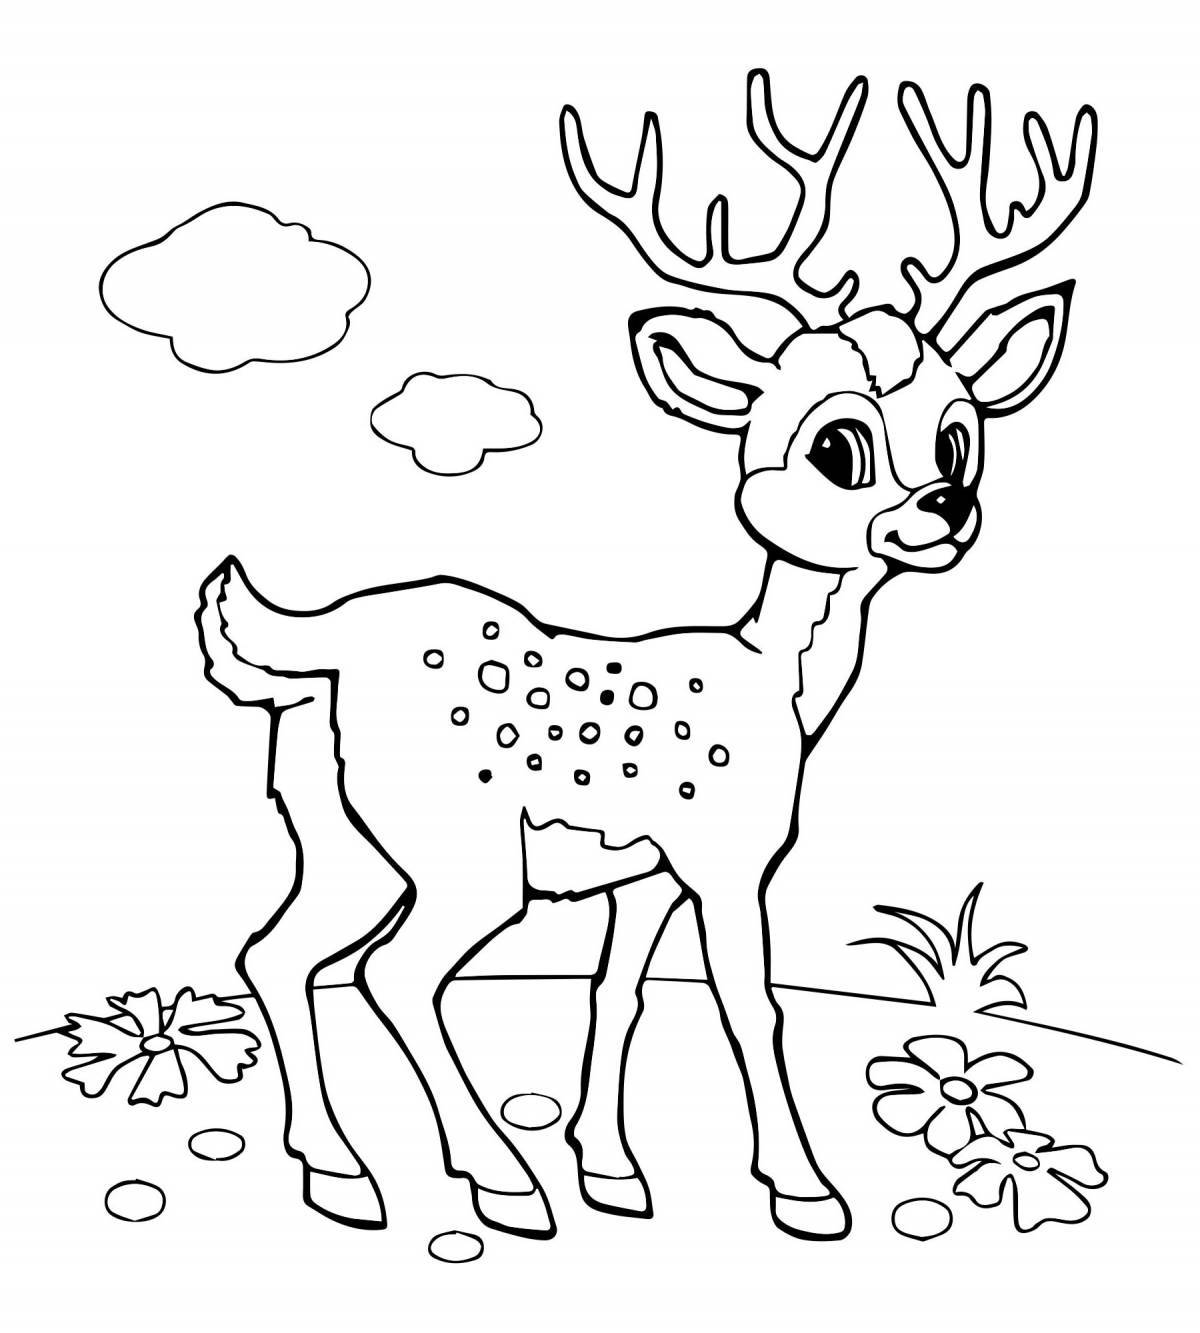 Outstanding deer coloring page for kids